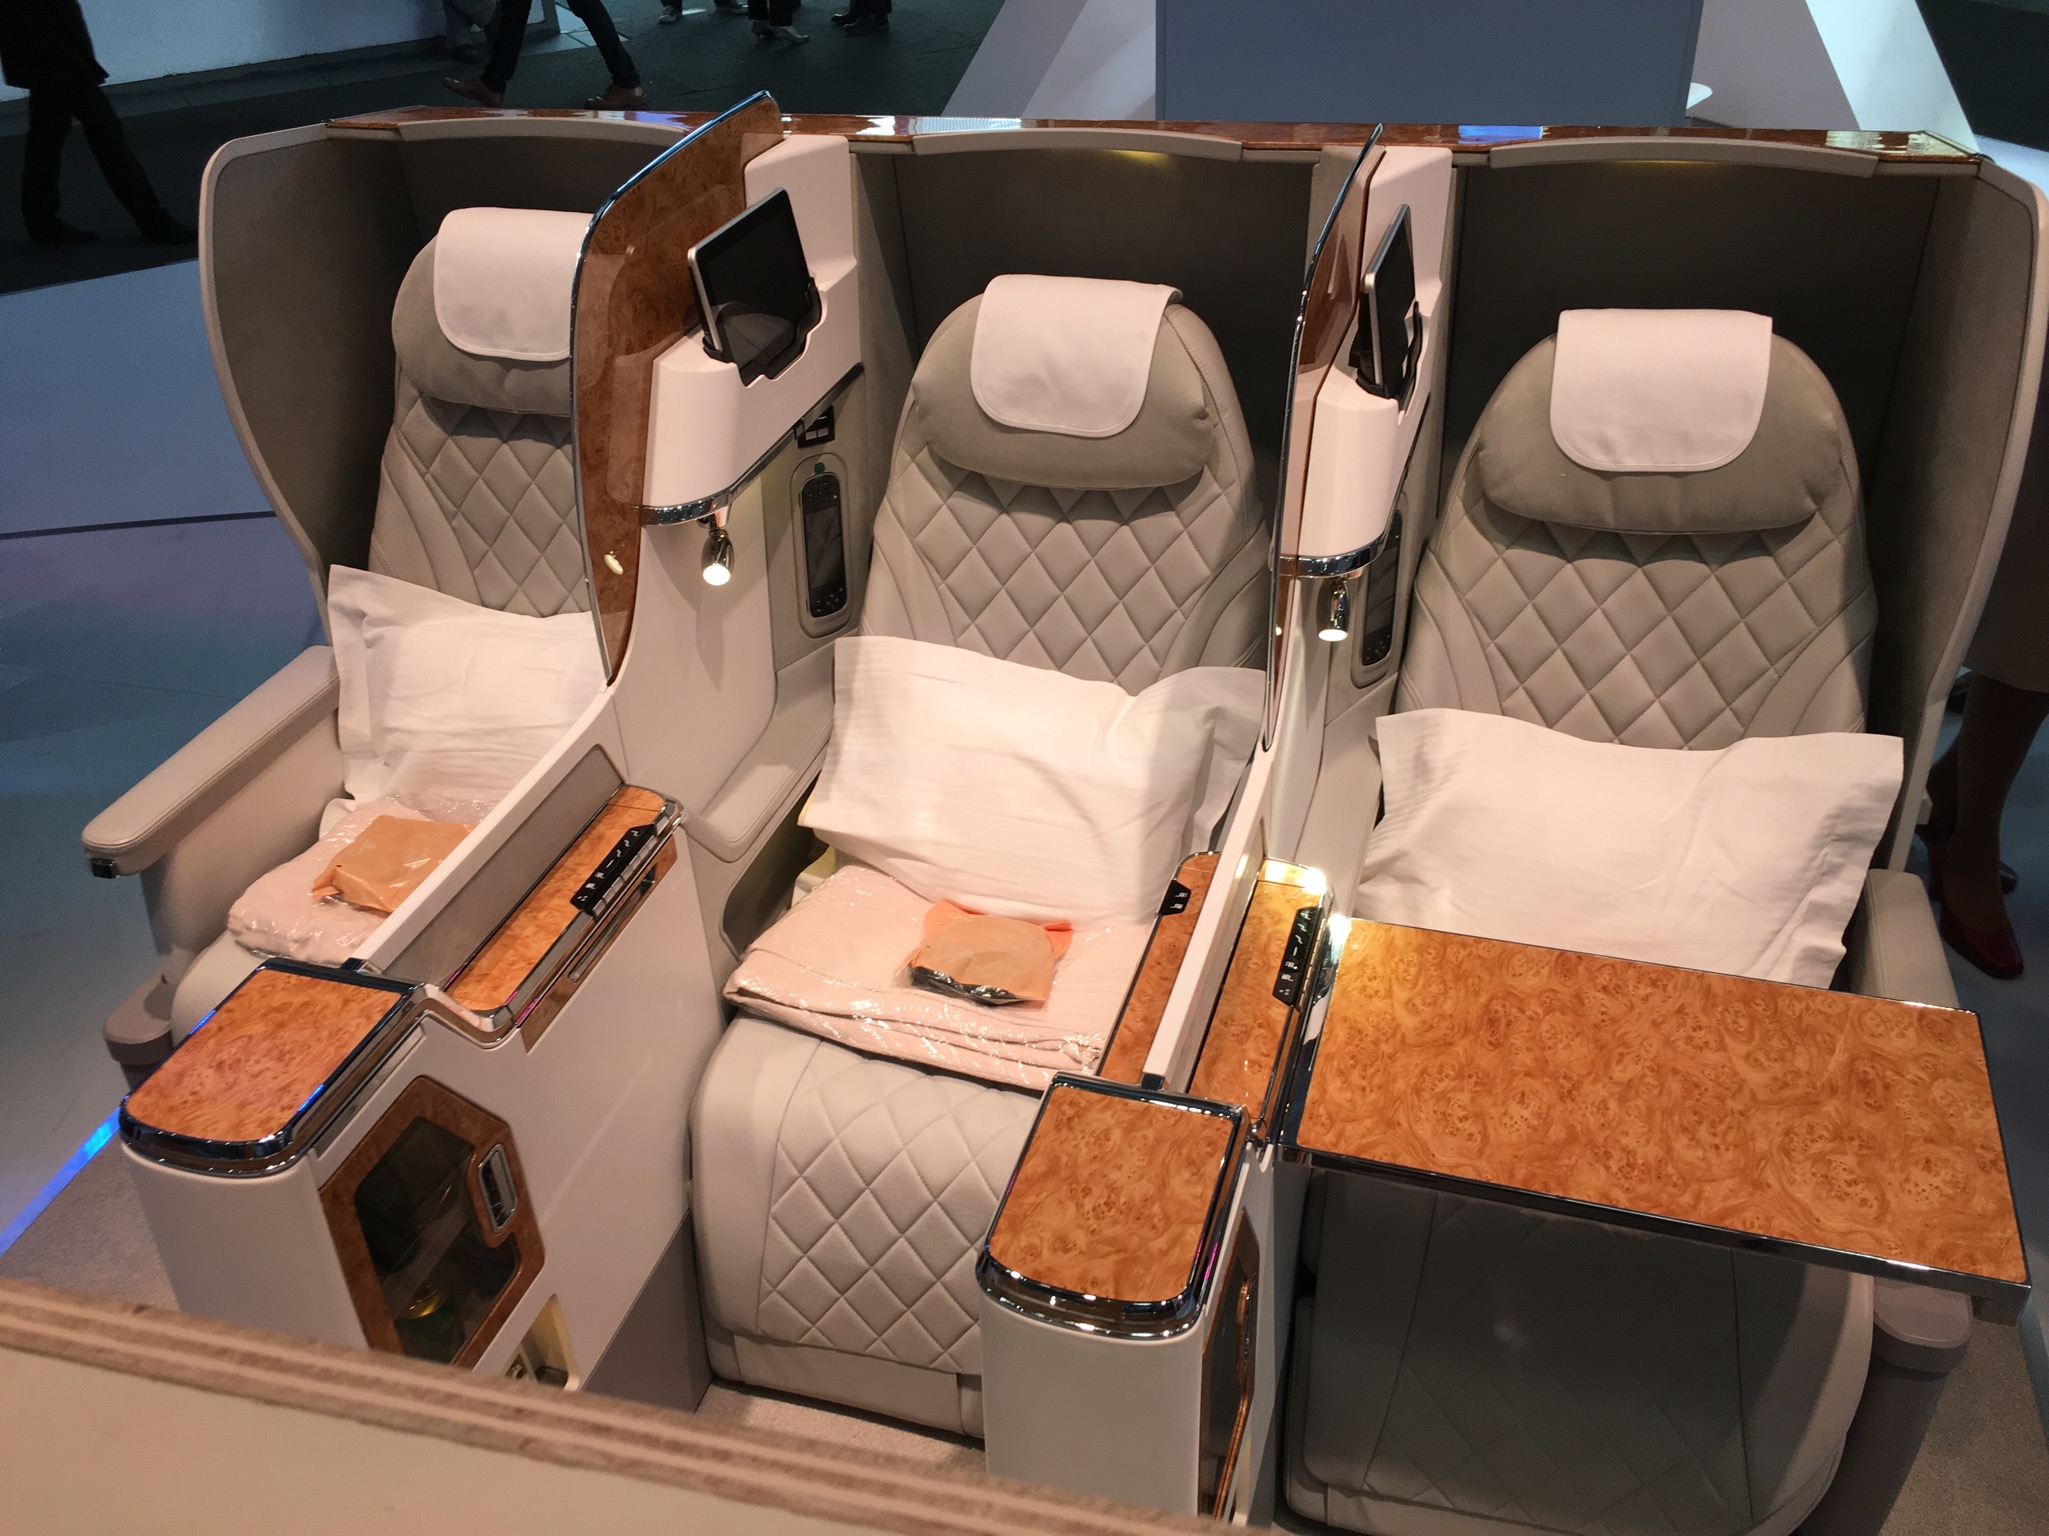 Image result for emirates new business class retrofit